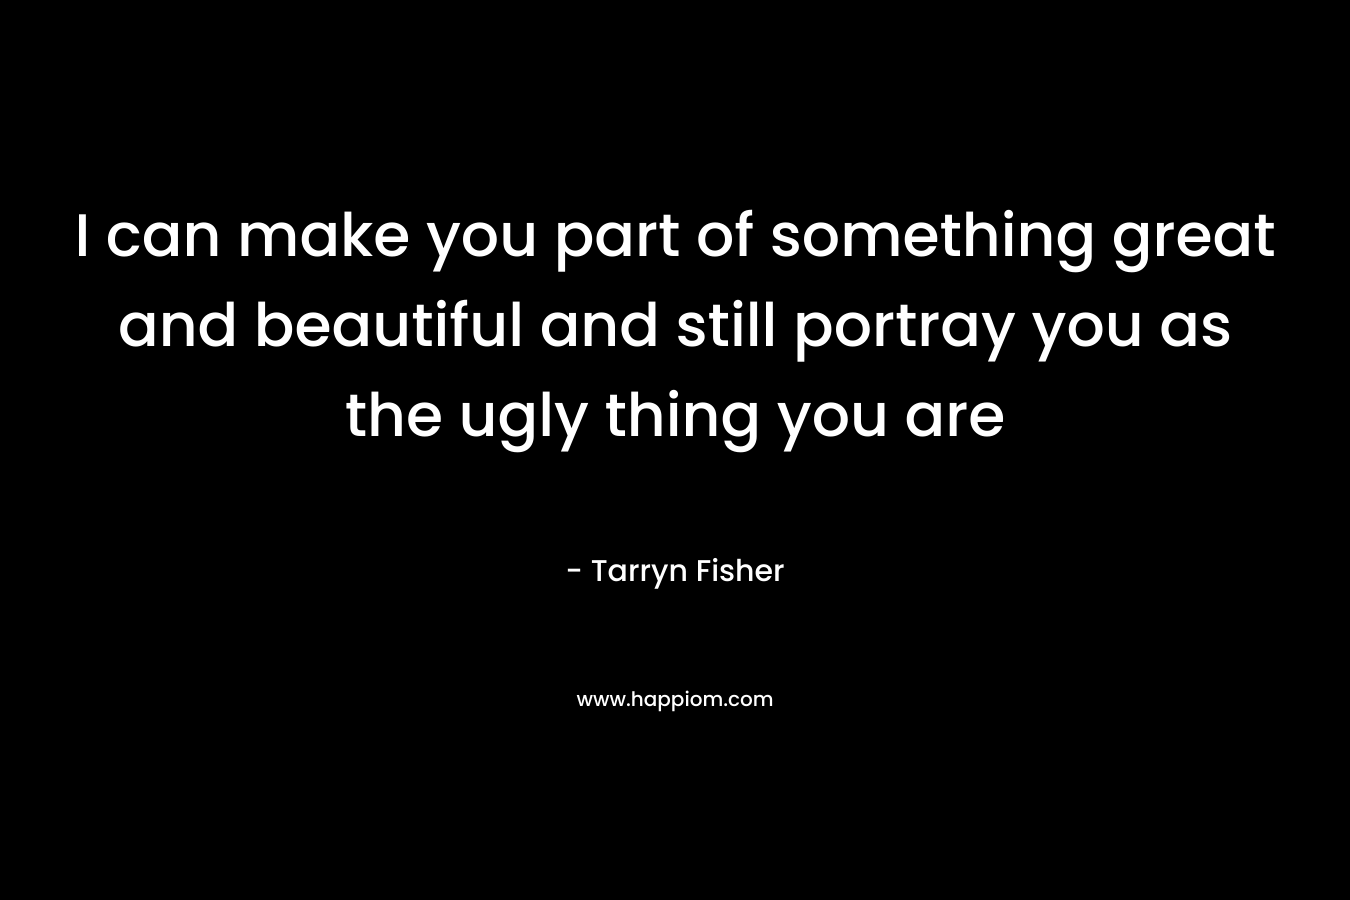 I can make you part of something great and beautiful and still portray you as the ugly thing you are